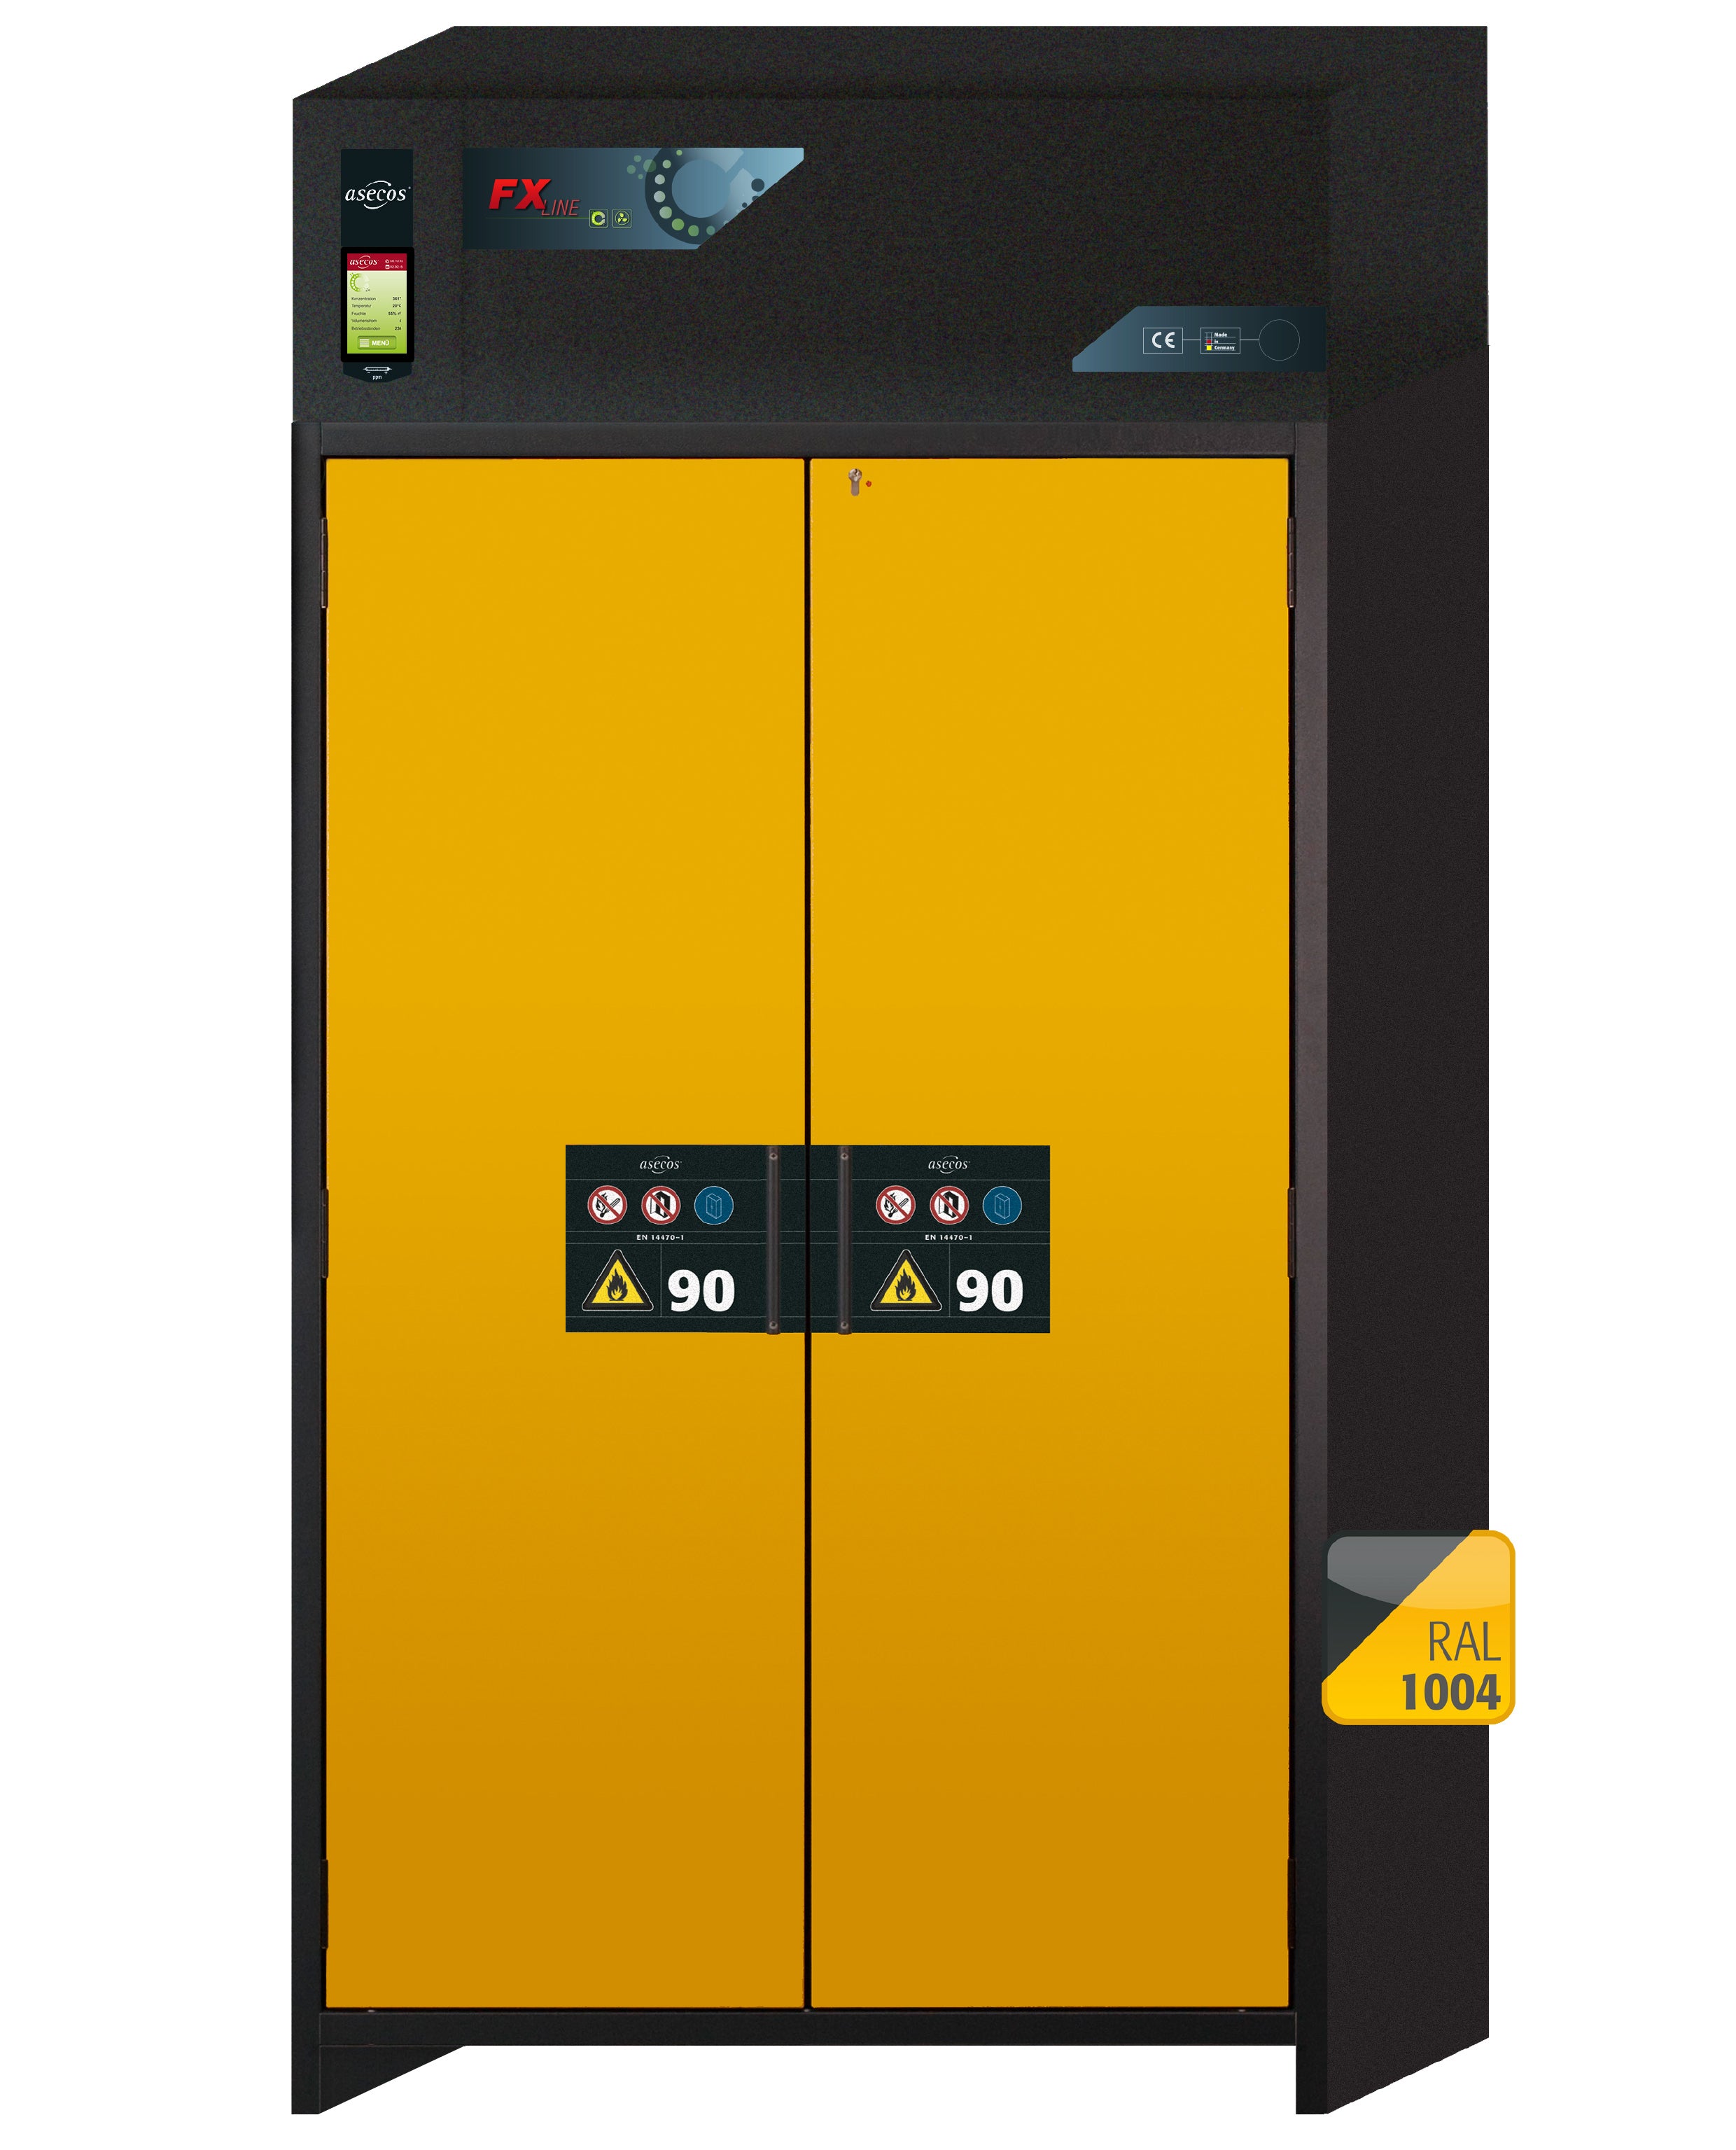 Type 90 recirculating air filter cabinet FX-CLASSIC-90 model FX90.229.120.MV in safety yellow RAL 1004 with 6x standard pull-out tray (sheet steel)